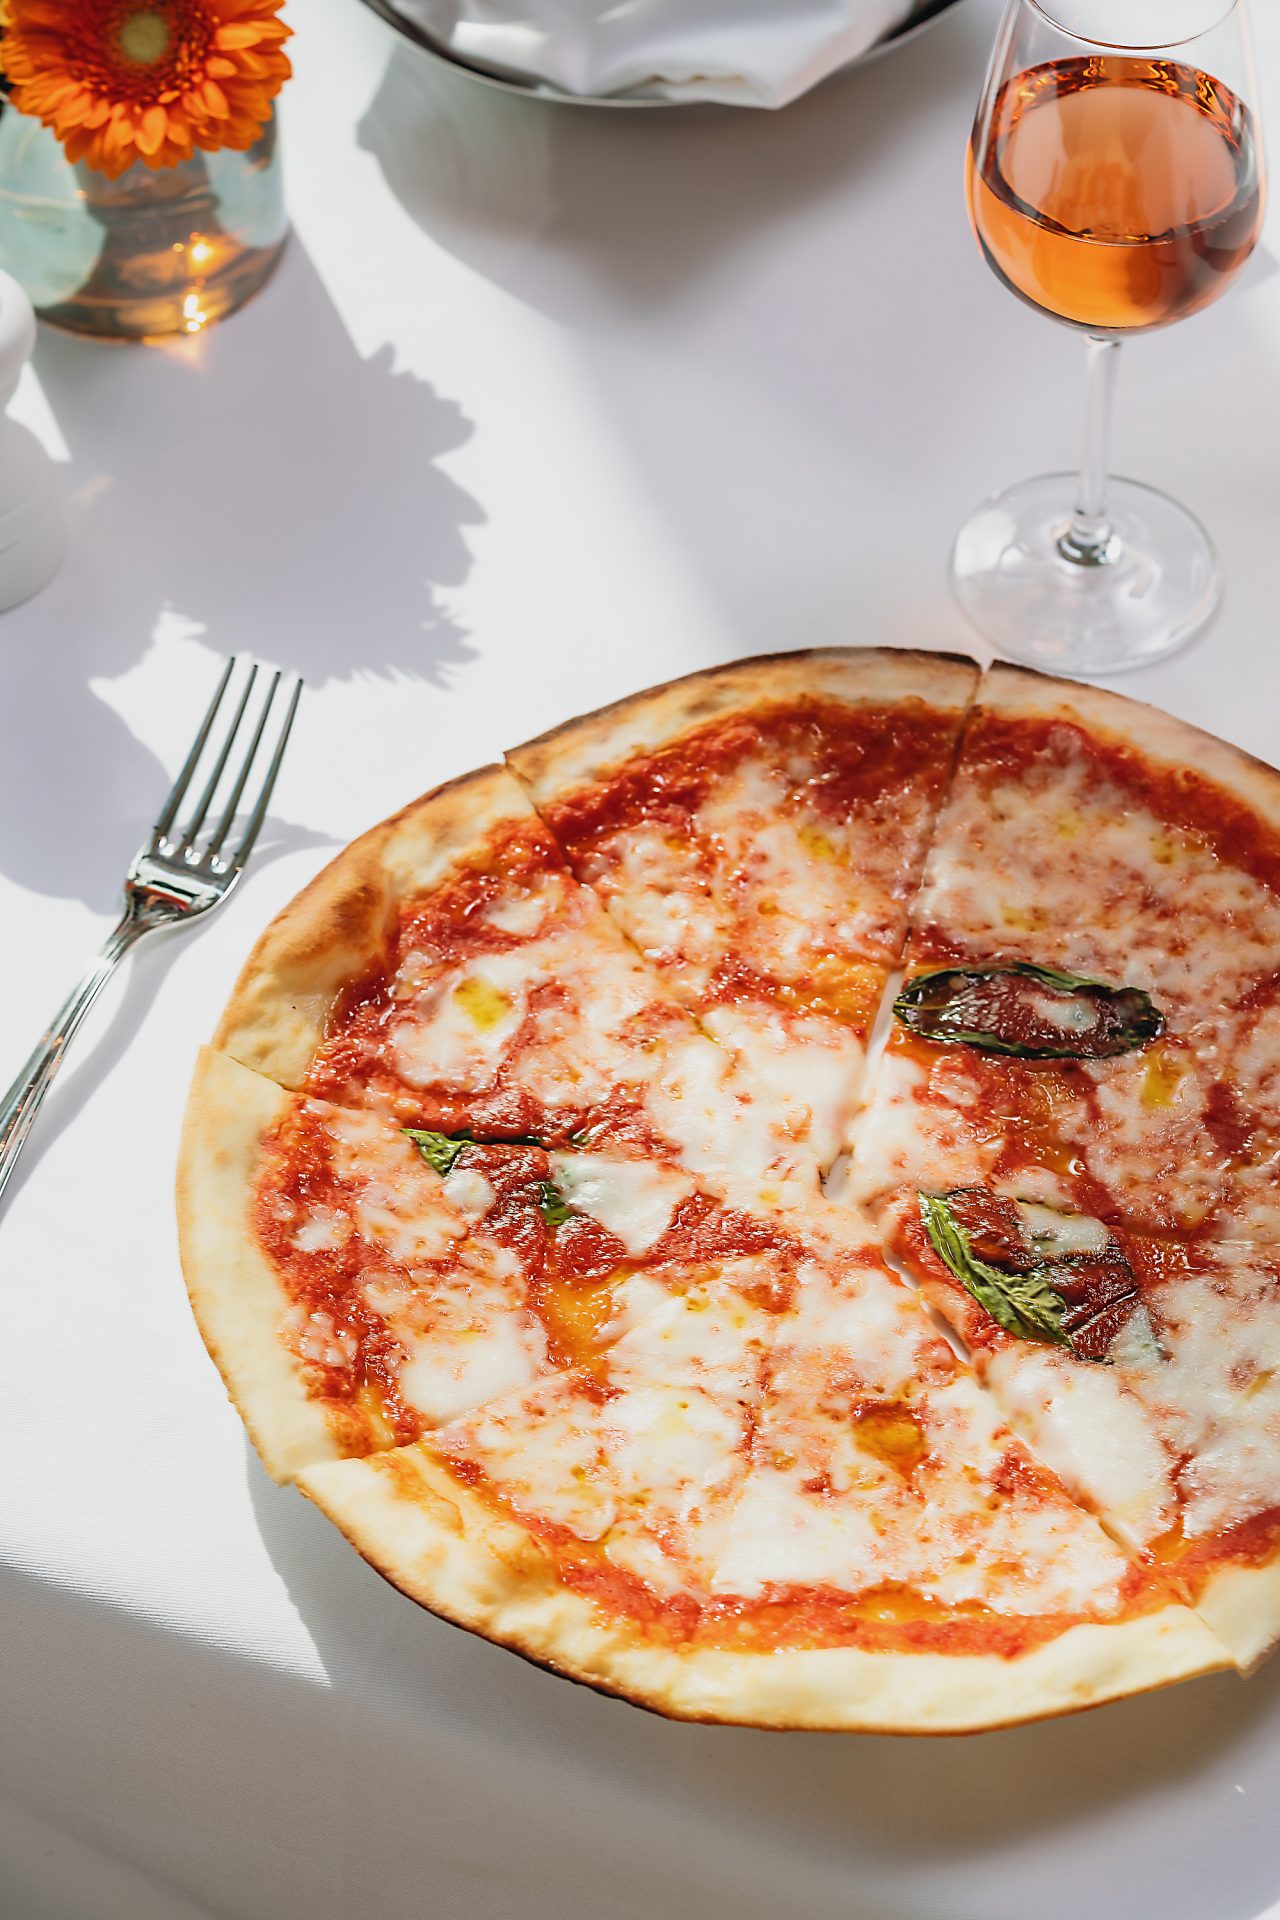 Classic Pizza Margherita: A Perfect Combination of Tomato, Mozzarella & Basil Served at Madeo Fancy Restaurant in Riyadh